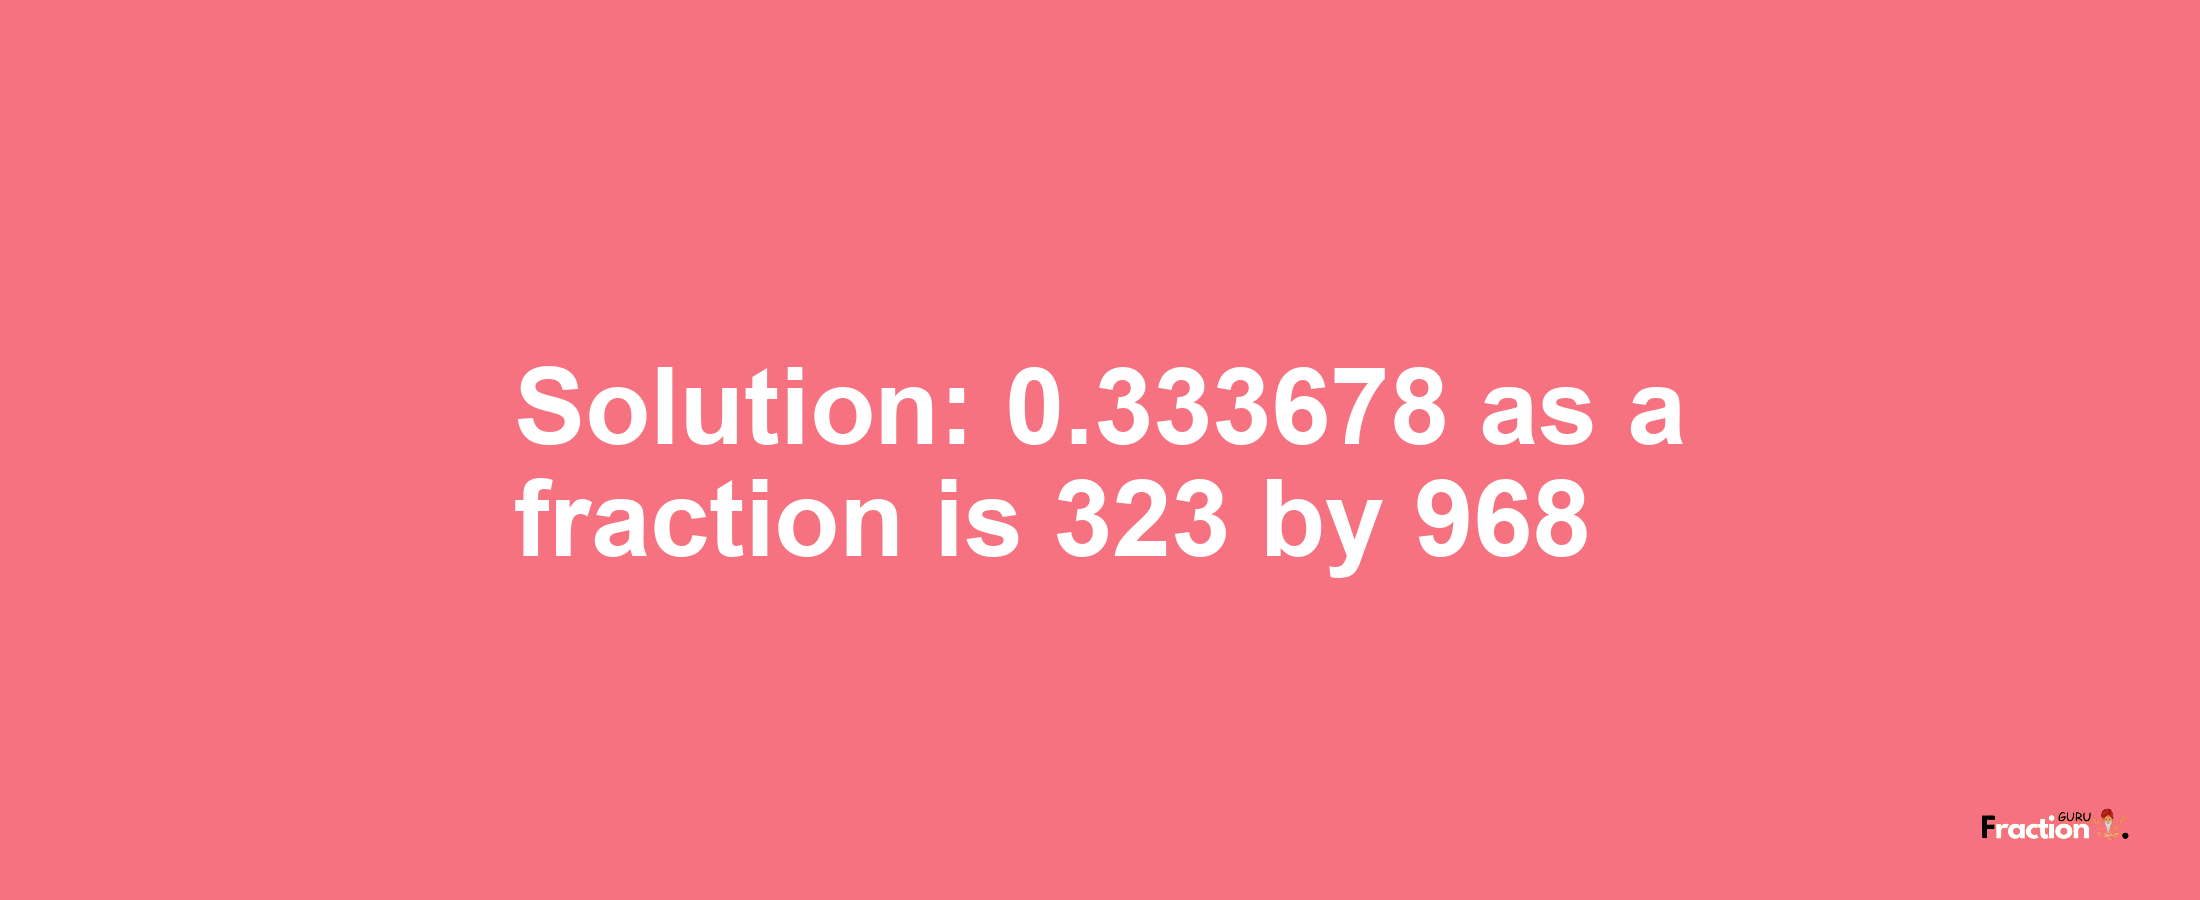 Solution:0.333678 as a fraction is 323/968